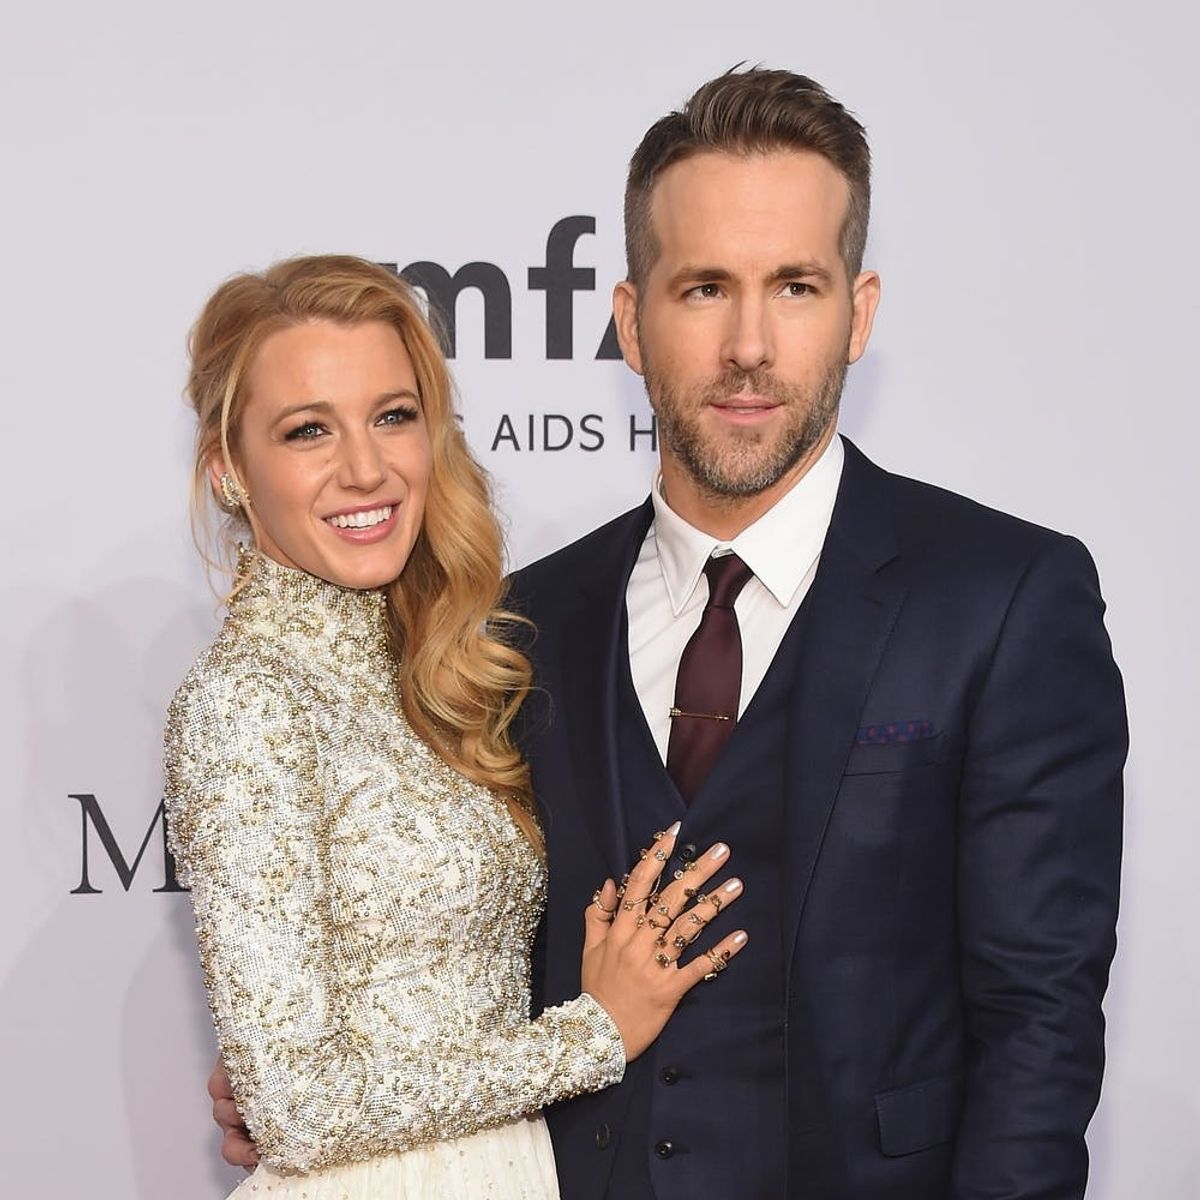 Blake Lively and Ryan Reynolds are (Reportedly) Expecting Baby #2